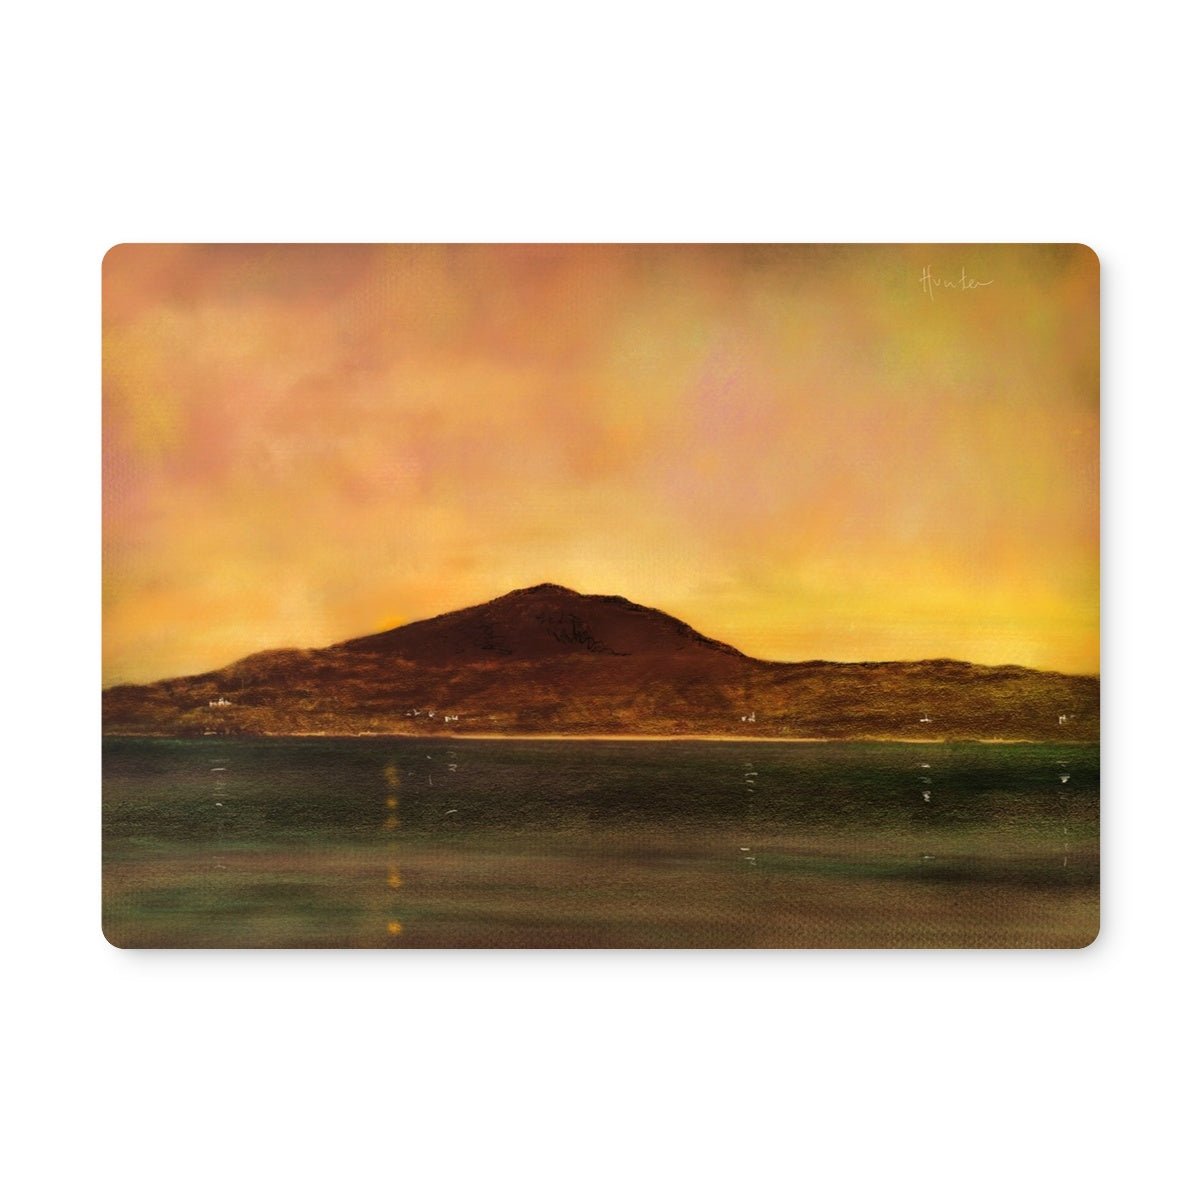 Eriskay Dusk Art Gifts Placemat-Placemats-Hebridean Islands Art Gallery-4 Placemats-Paintings, Prints, Homeware, Art Gifts From Scotland By Scottish Artist Kevin Hunter